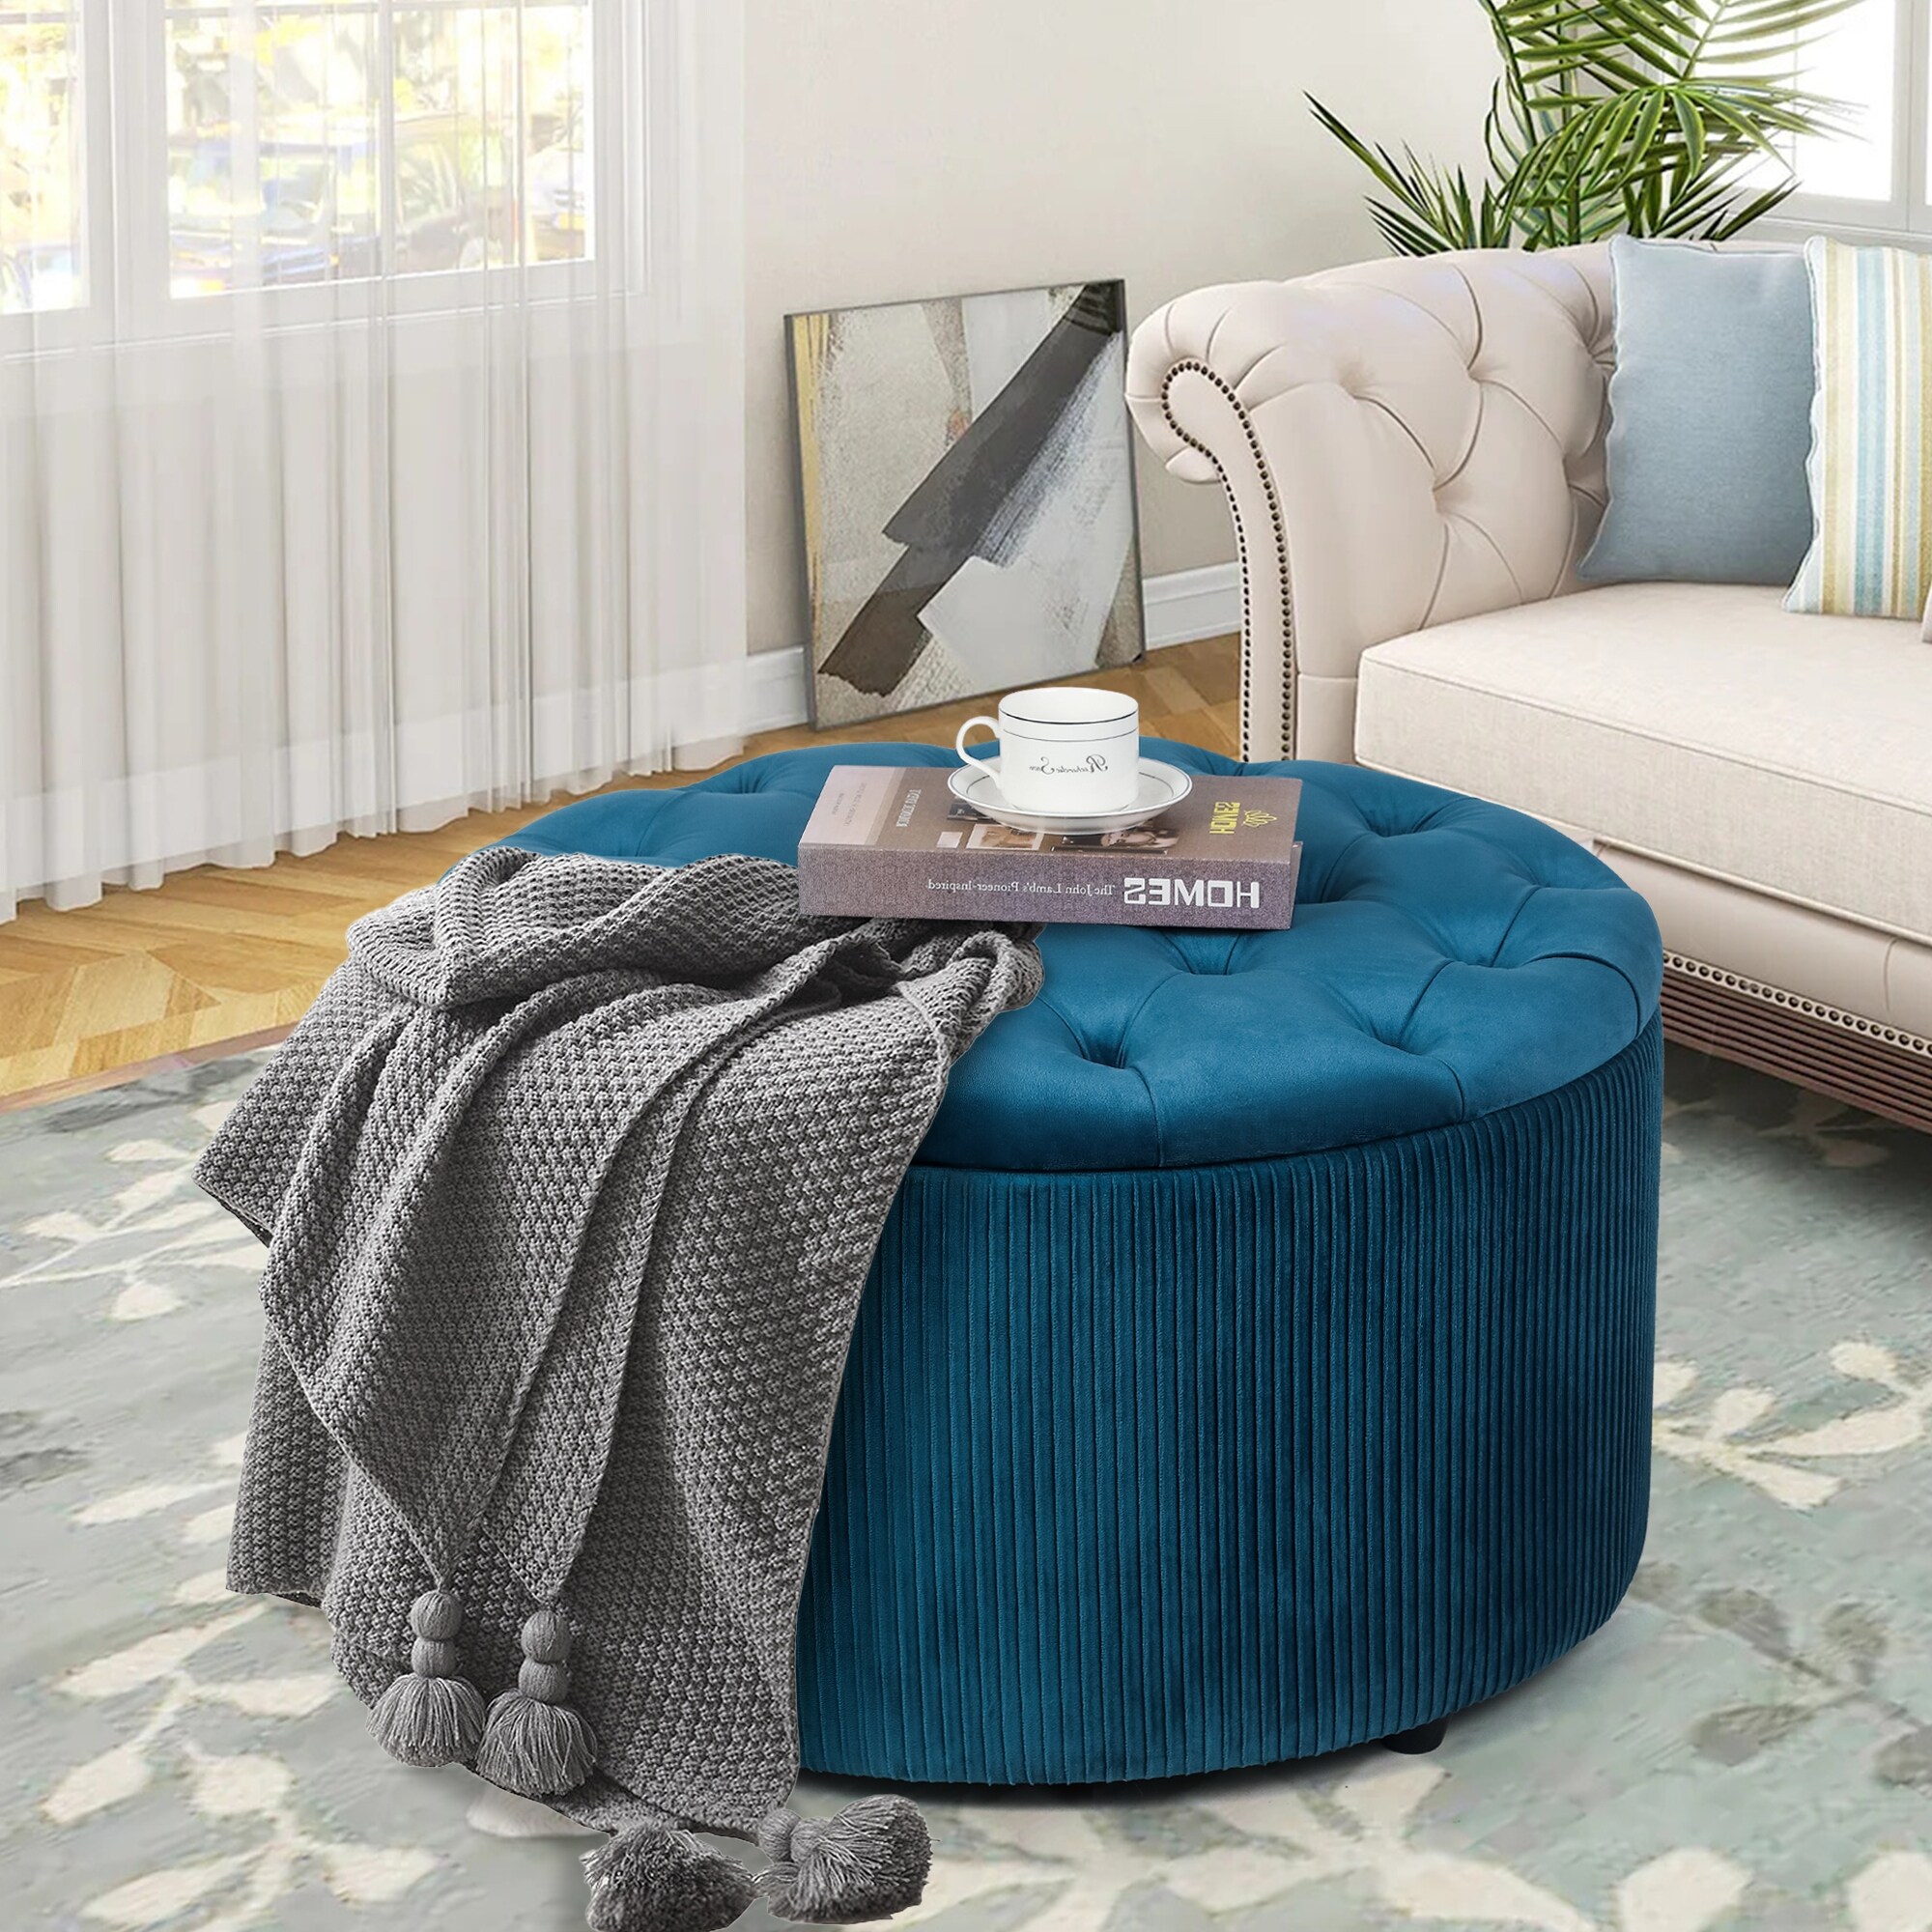 https://ak1.ostkcdn.com/images/products/is/images/direct/6f6800f2a428ceb8f4b2303405c7179fe3fb0745/Adeco-Round-Storage-Ottoman-Button-Tufted-Footrest-Stool-Bench.jpg